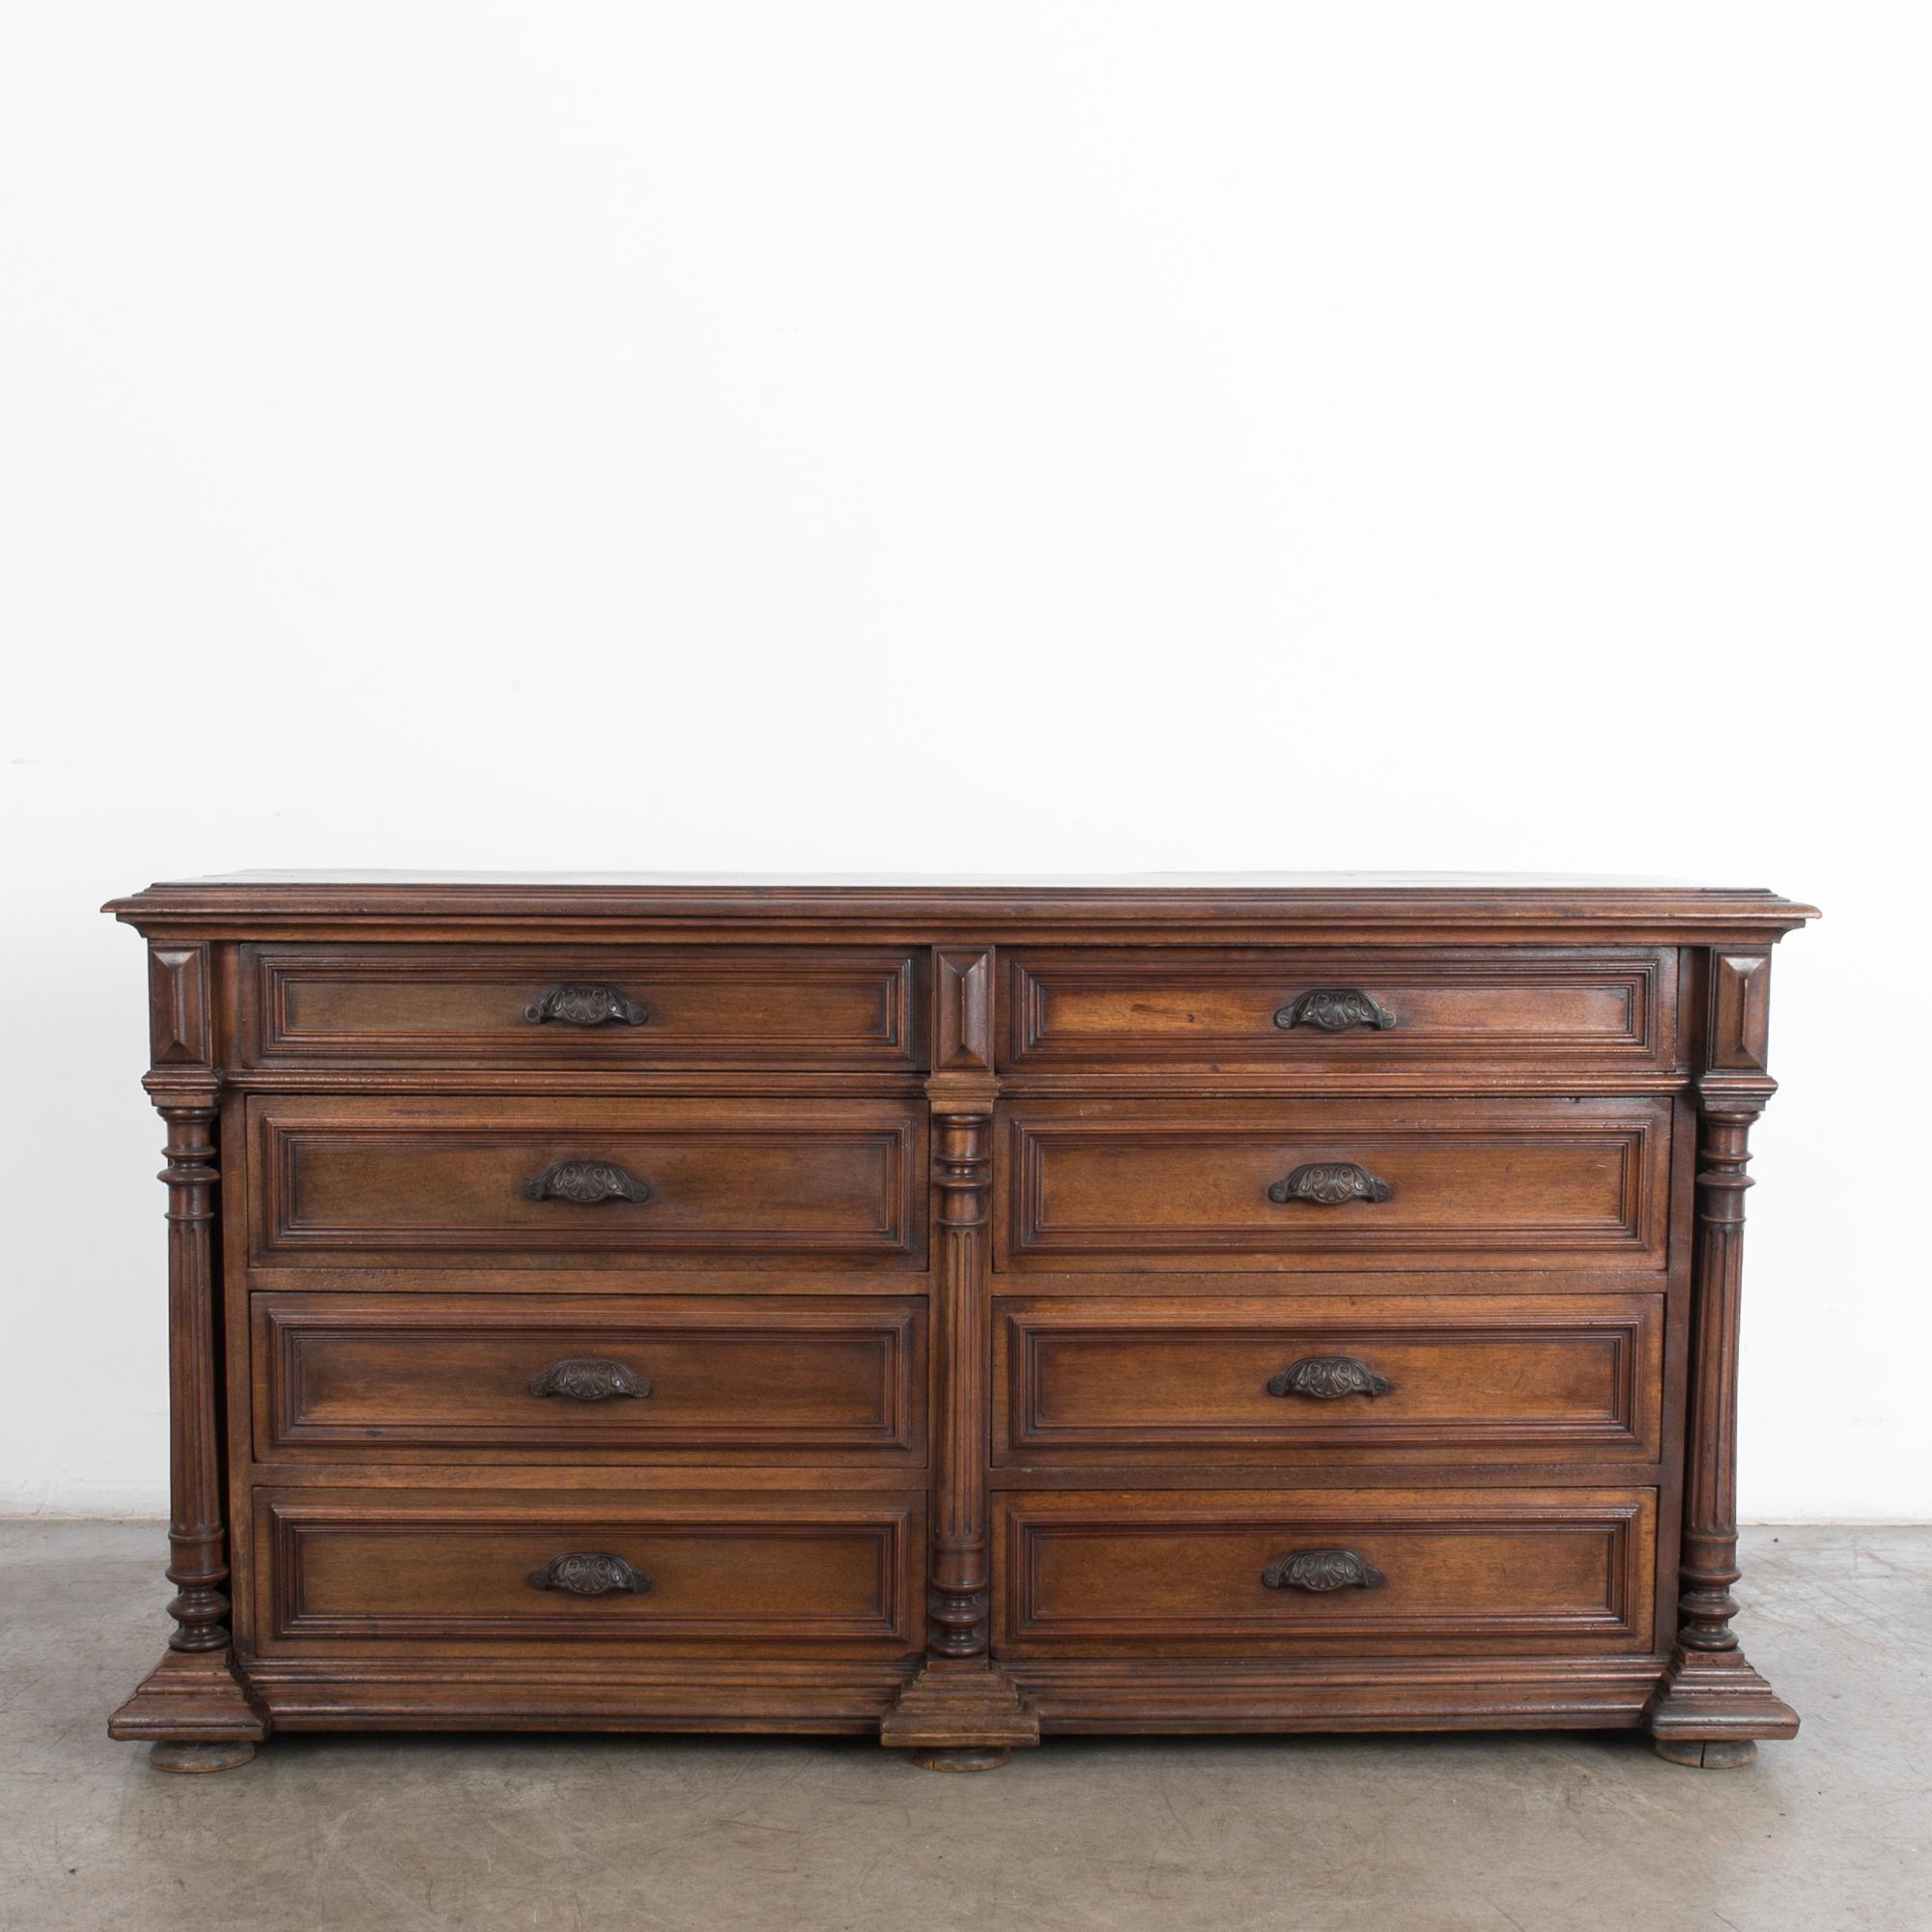 A wooden chest of drawers from France, circa 1880. Eight pullout / pull-out drawers are framed by fluted column moldings. Shell-like curves of the drawer handles provide a gentle counterpoint to the linear neoclassical silhouette. The deep tone and